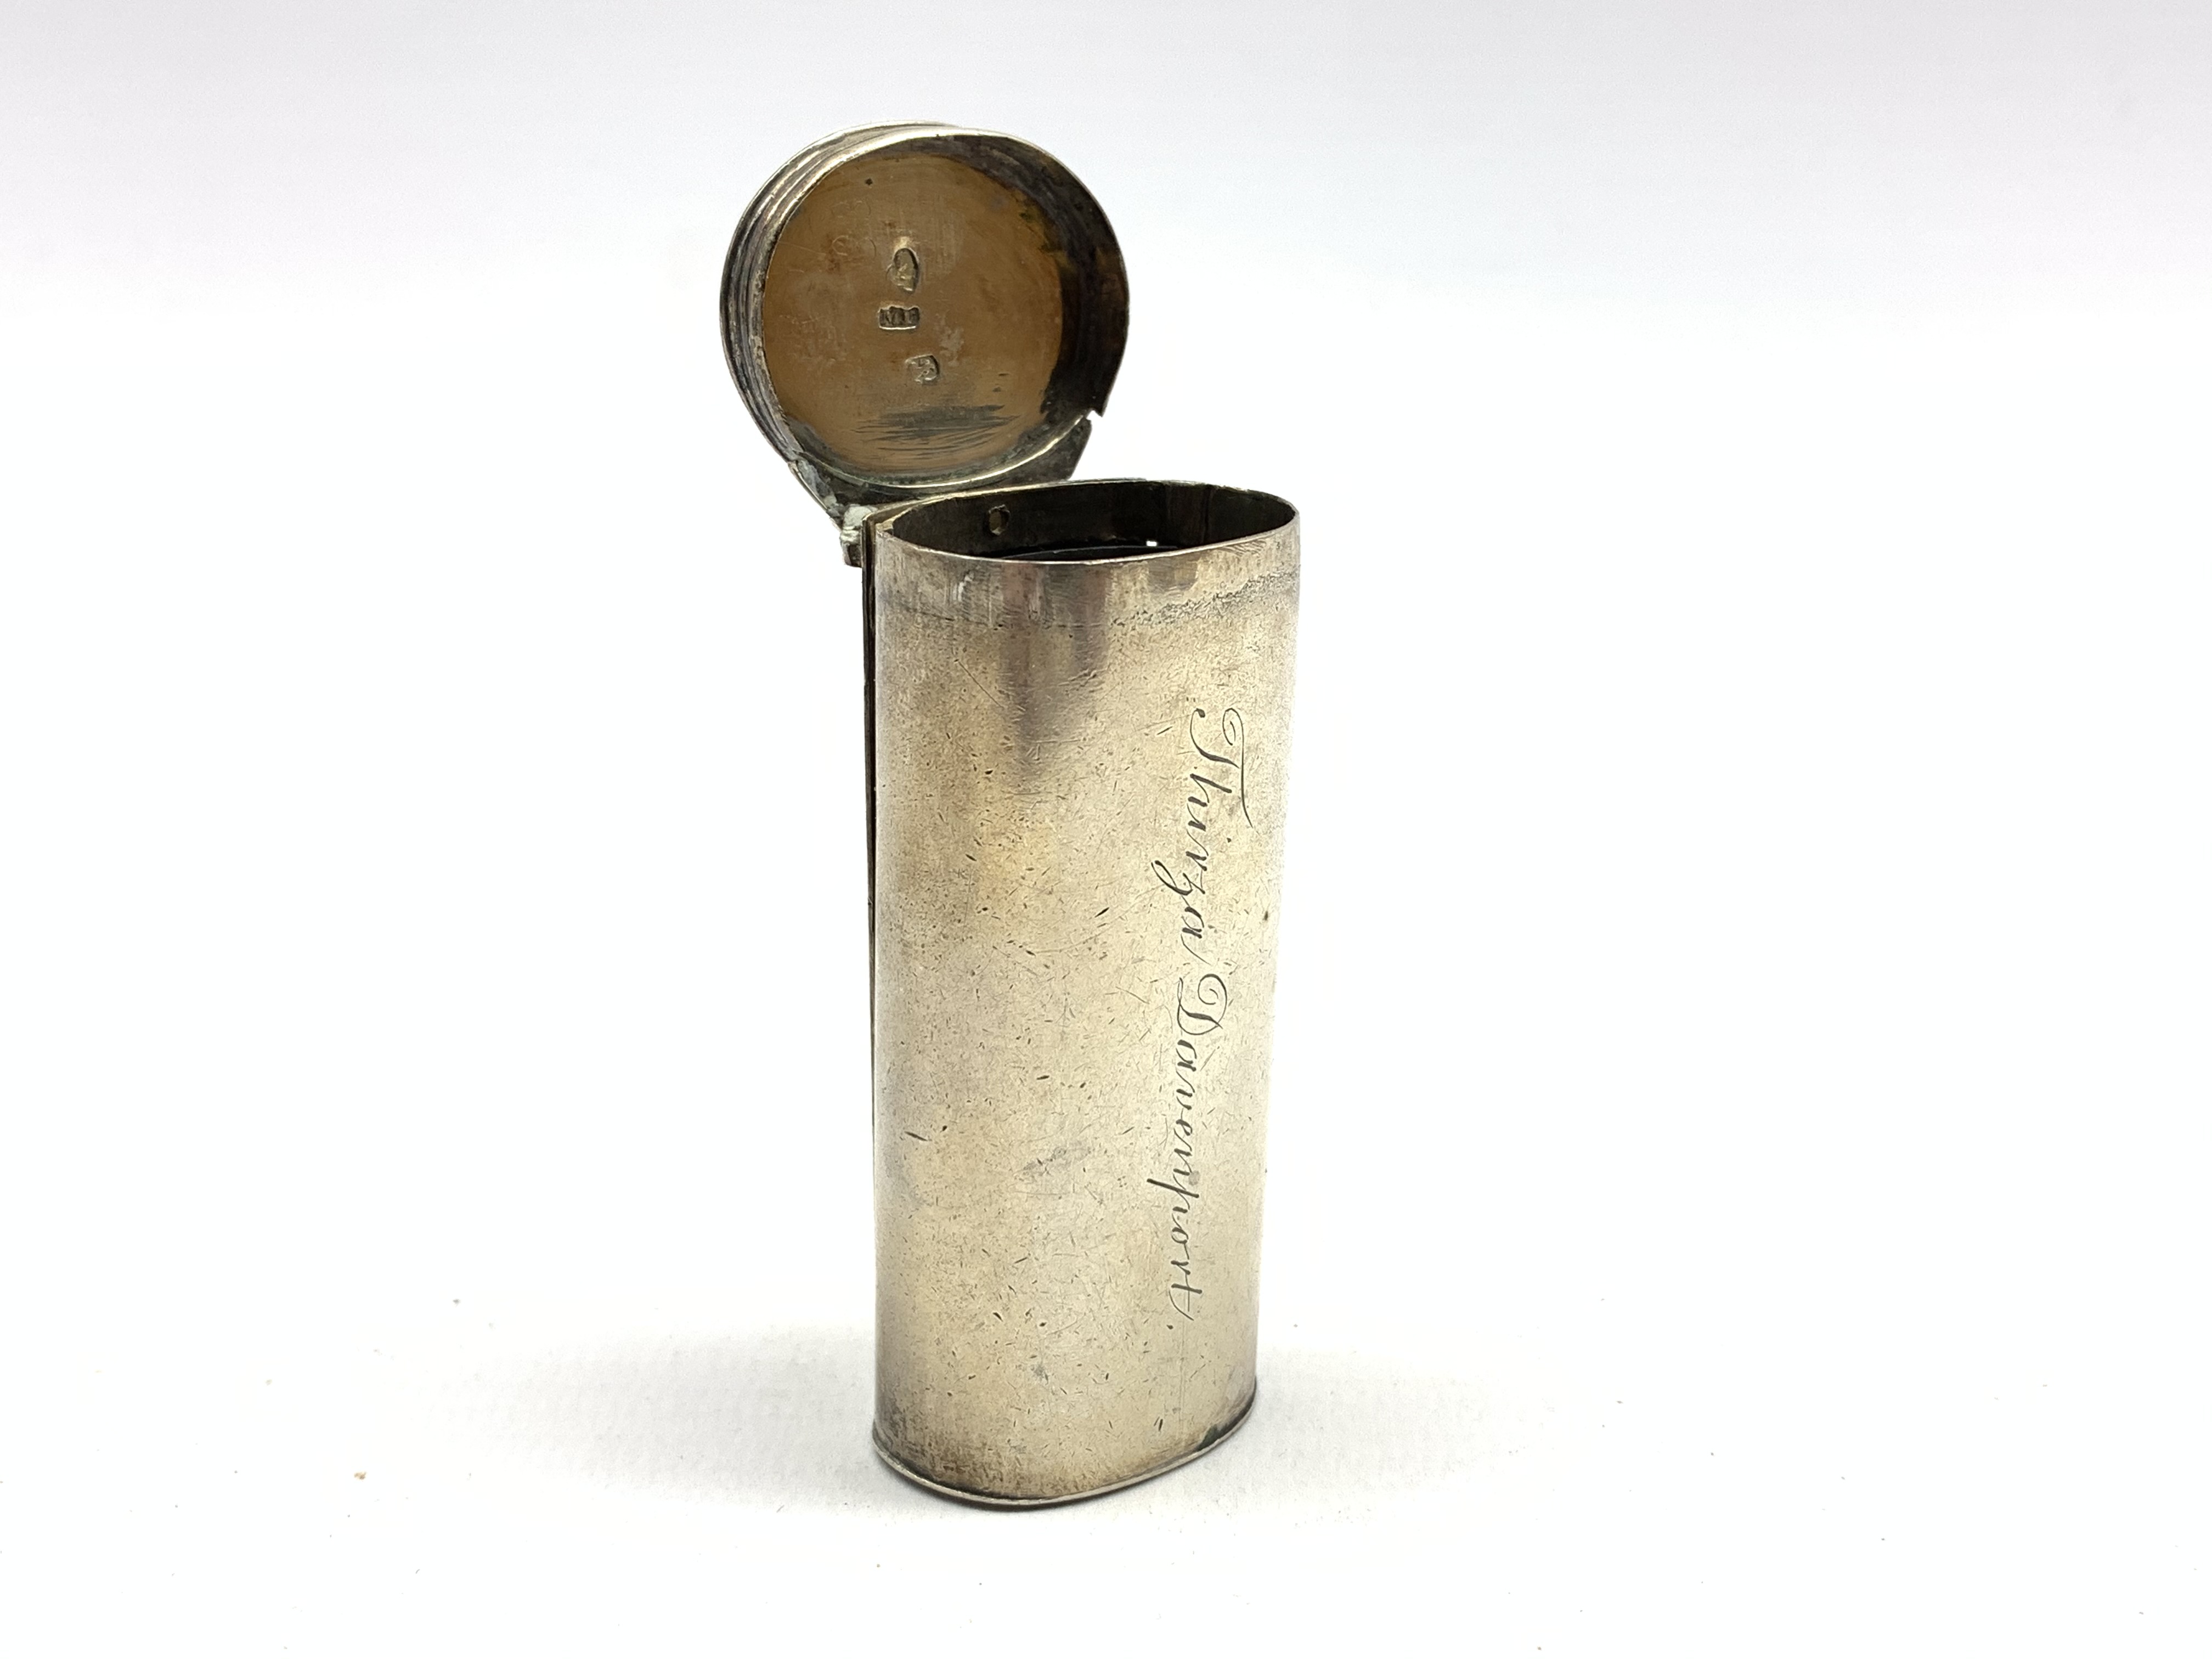 Early 19th Century silver nutmeg grater, the hinged side revealing a steel grater,